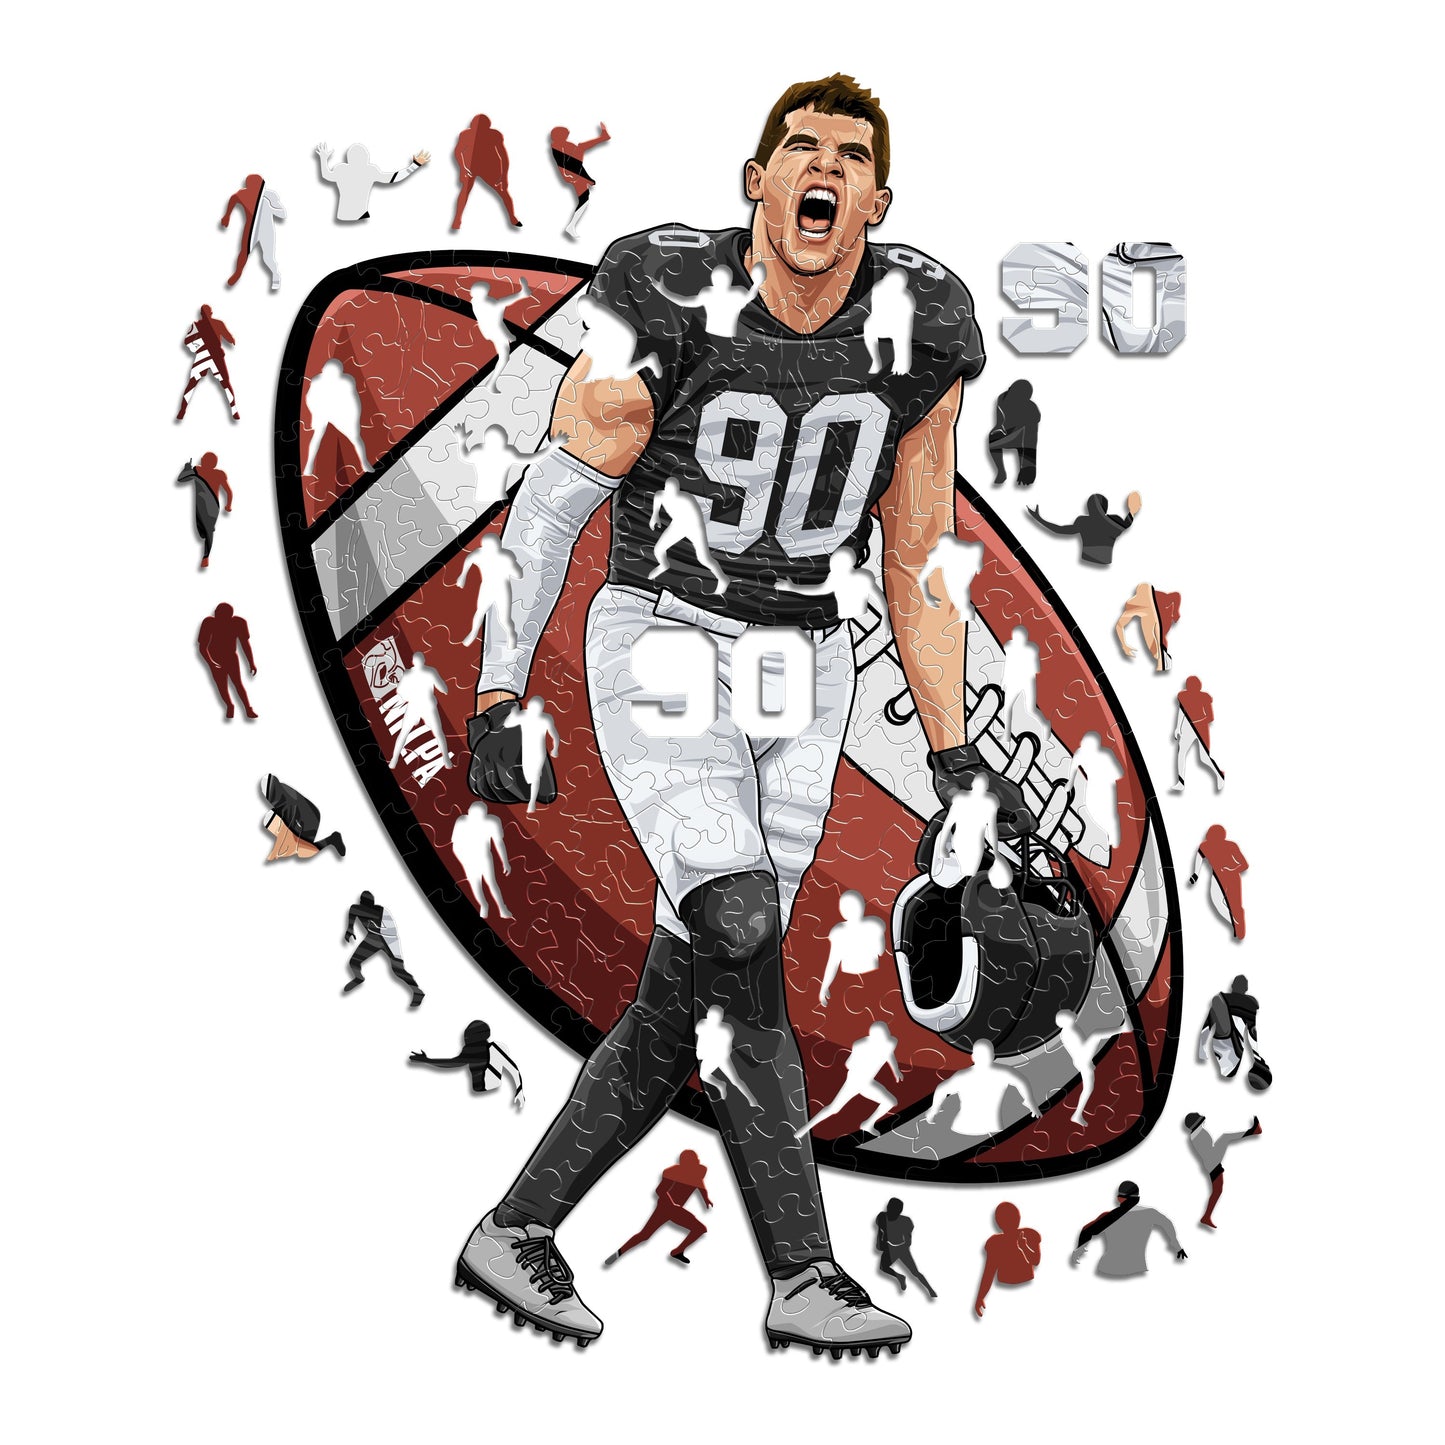 2 NFL Players Puzzles Of Your Choice (Up To 50% OFF)